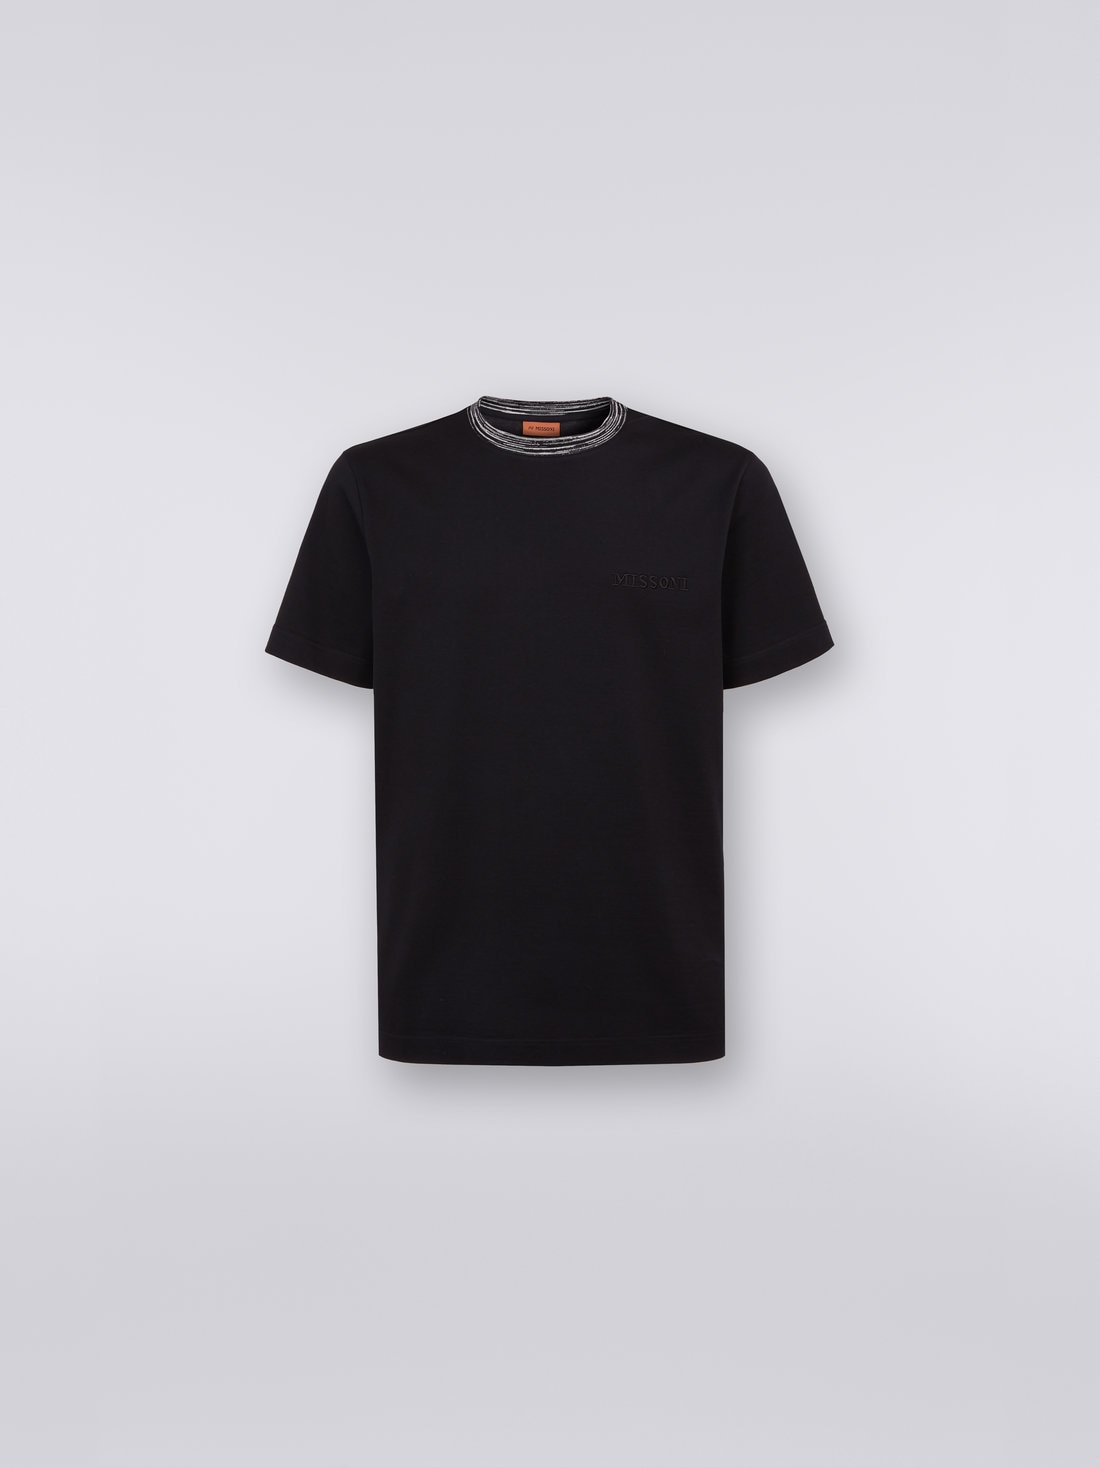 Crew-neck cotton T-shirt with contrasting detail and logo lettering, Black    - 0